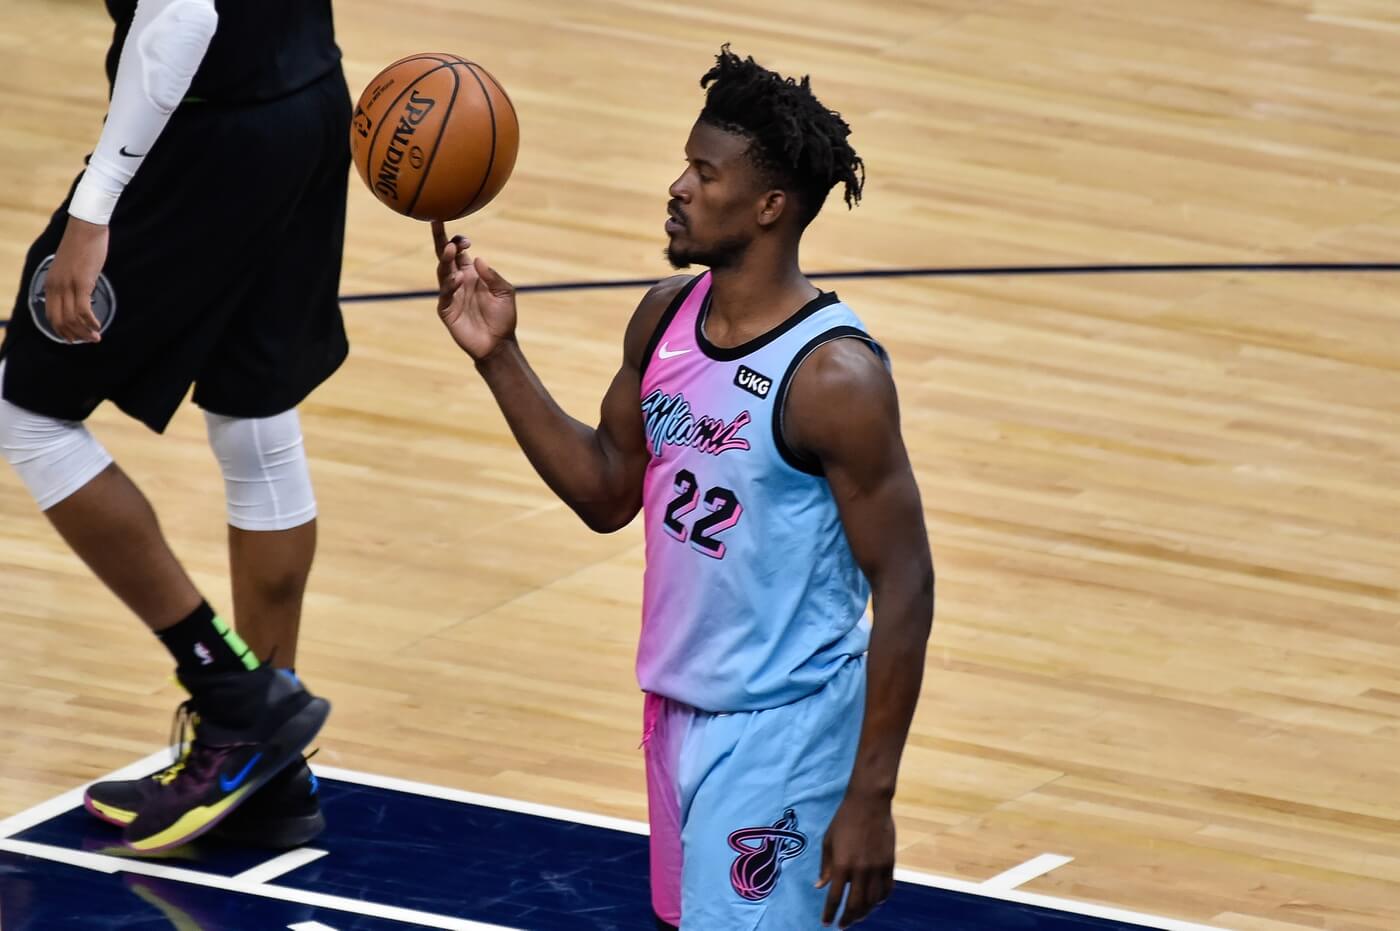 Apr 16, 2021; Minneapolis, Minnesota, USA; Miami Heat forward Jimmy Butler (22) spins the basketball on his finger during the fourth quarter against the Minnesota Timberwolves at Target Center. Mandatory Credit: Jeffrey Becker-USA TODAY Sports